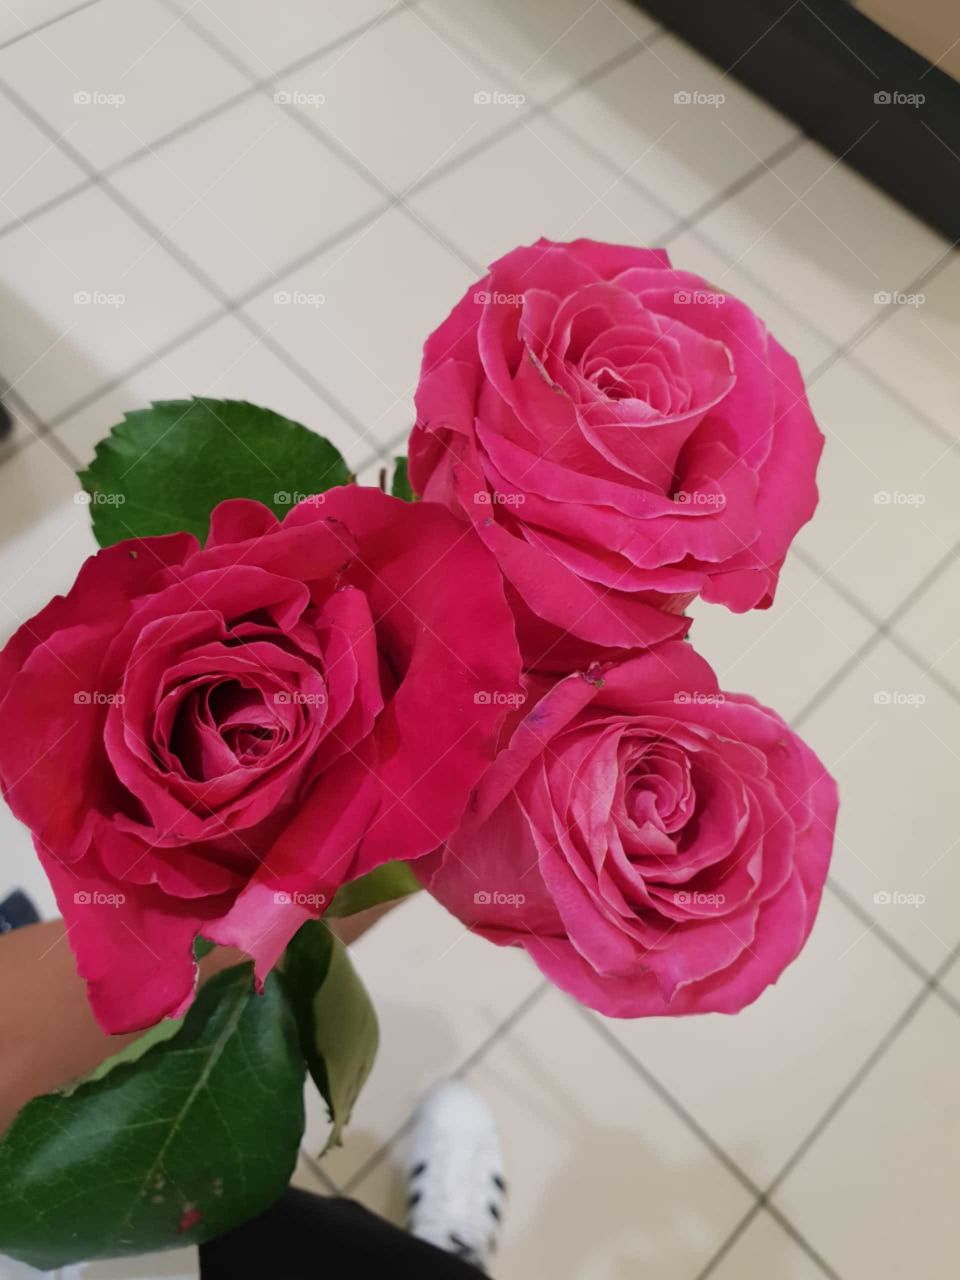 Three roses for you